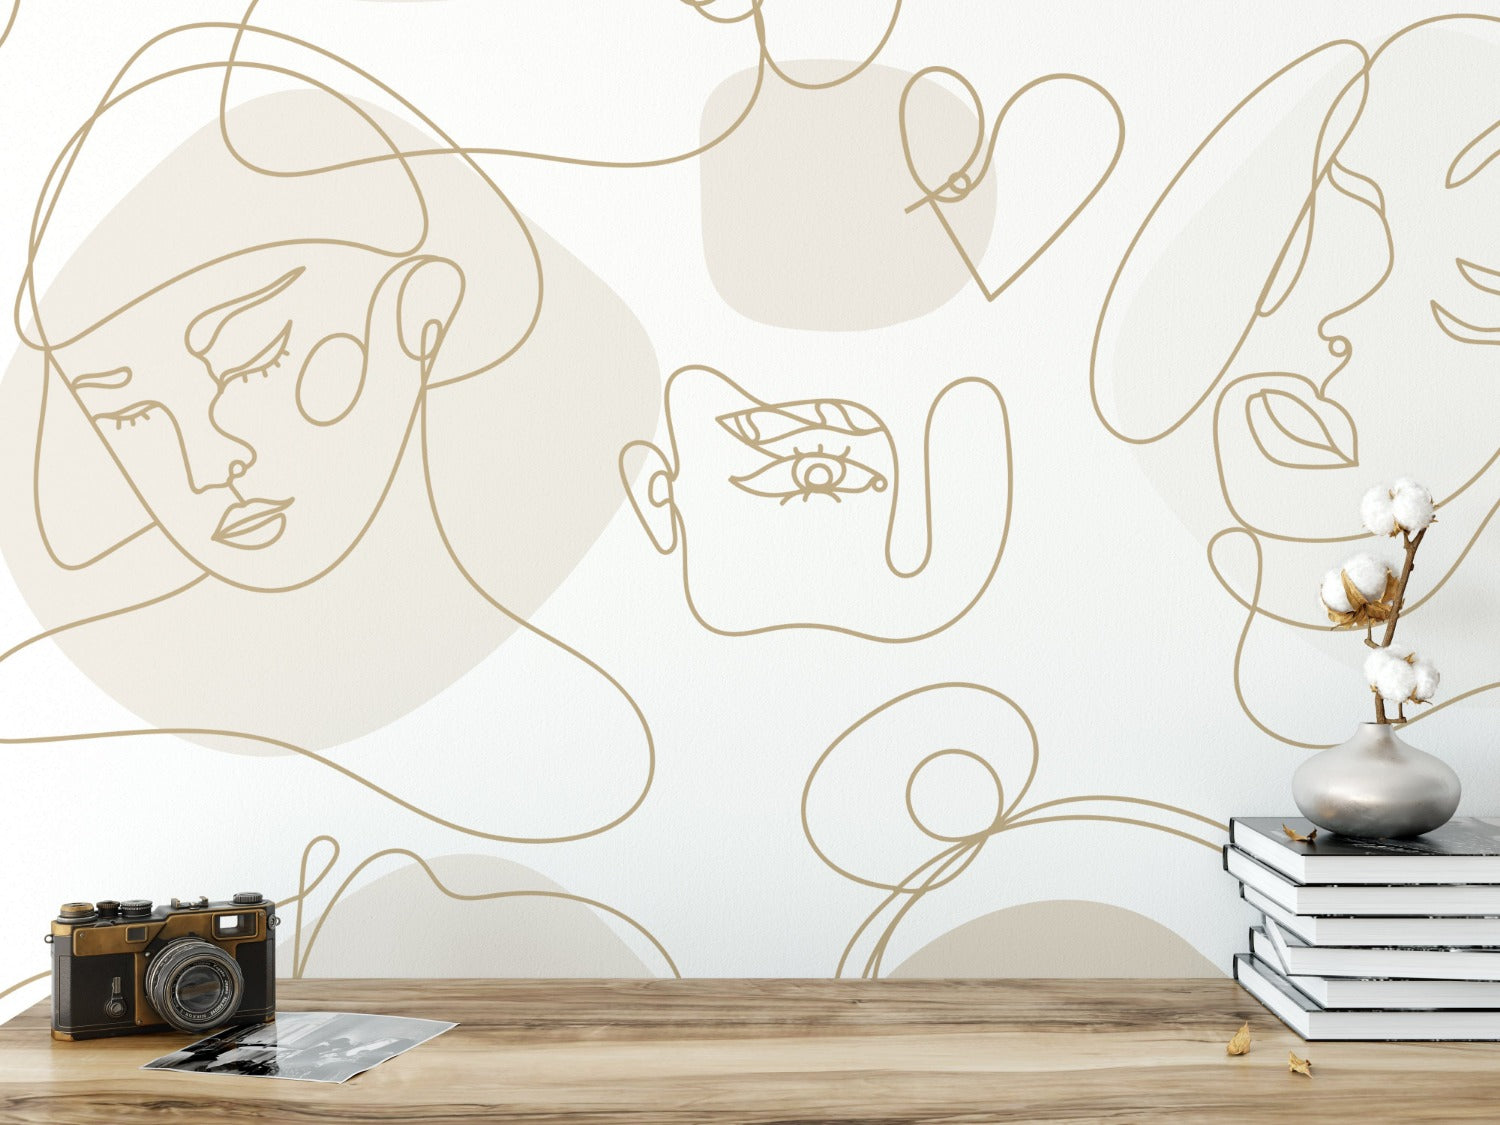 A modern and artistic wallpaper showcasing continuous golden line drawings of abstract faces on a white background. The faces are portrayed in various expressions and orientations, with some features highlighted by larger, shaded forms in the background.